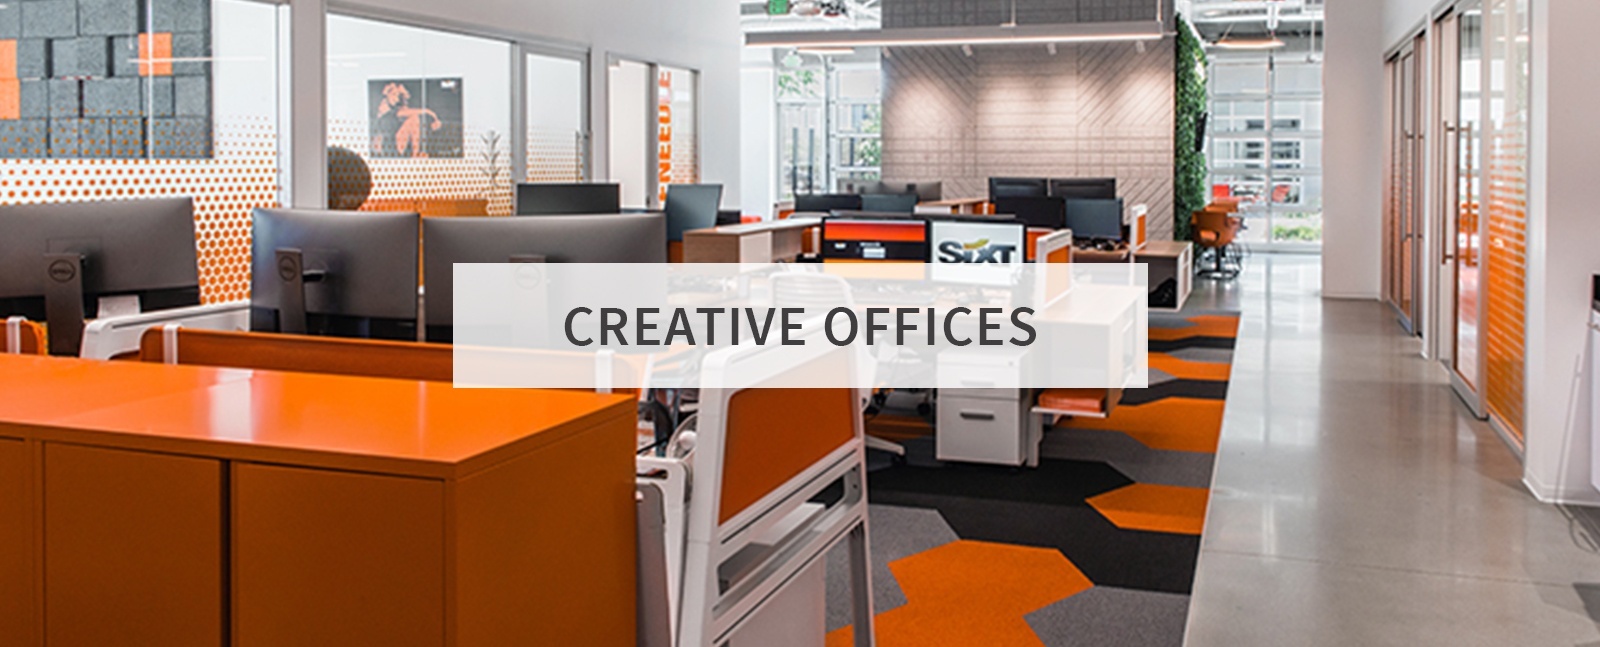 Creative Offices by Citron Design Group - Commercial Interior Design Services in Long Beach